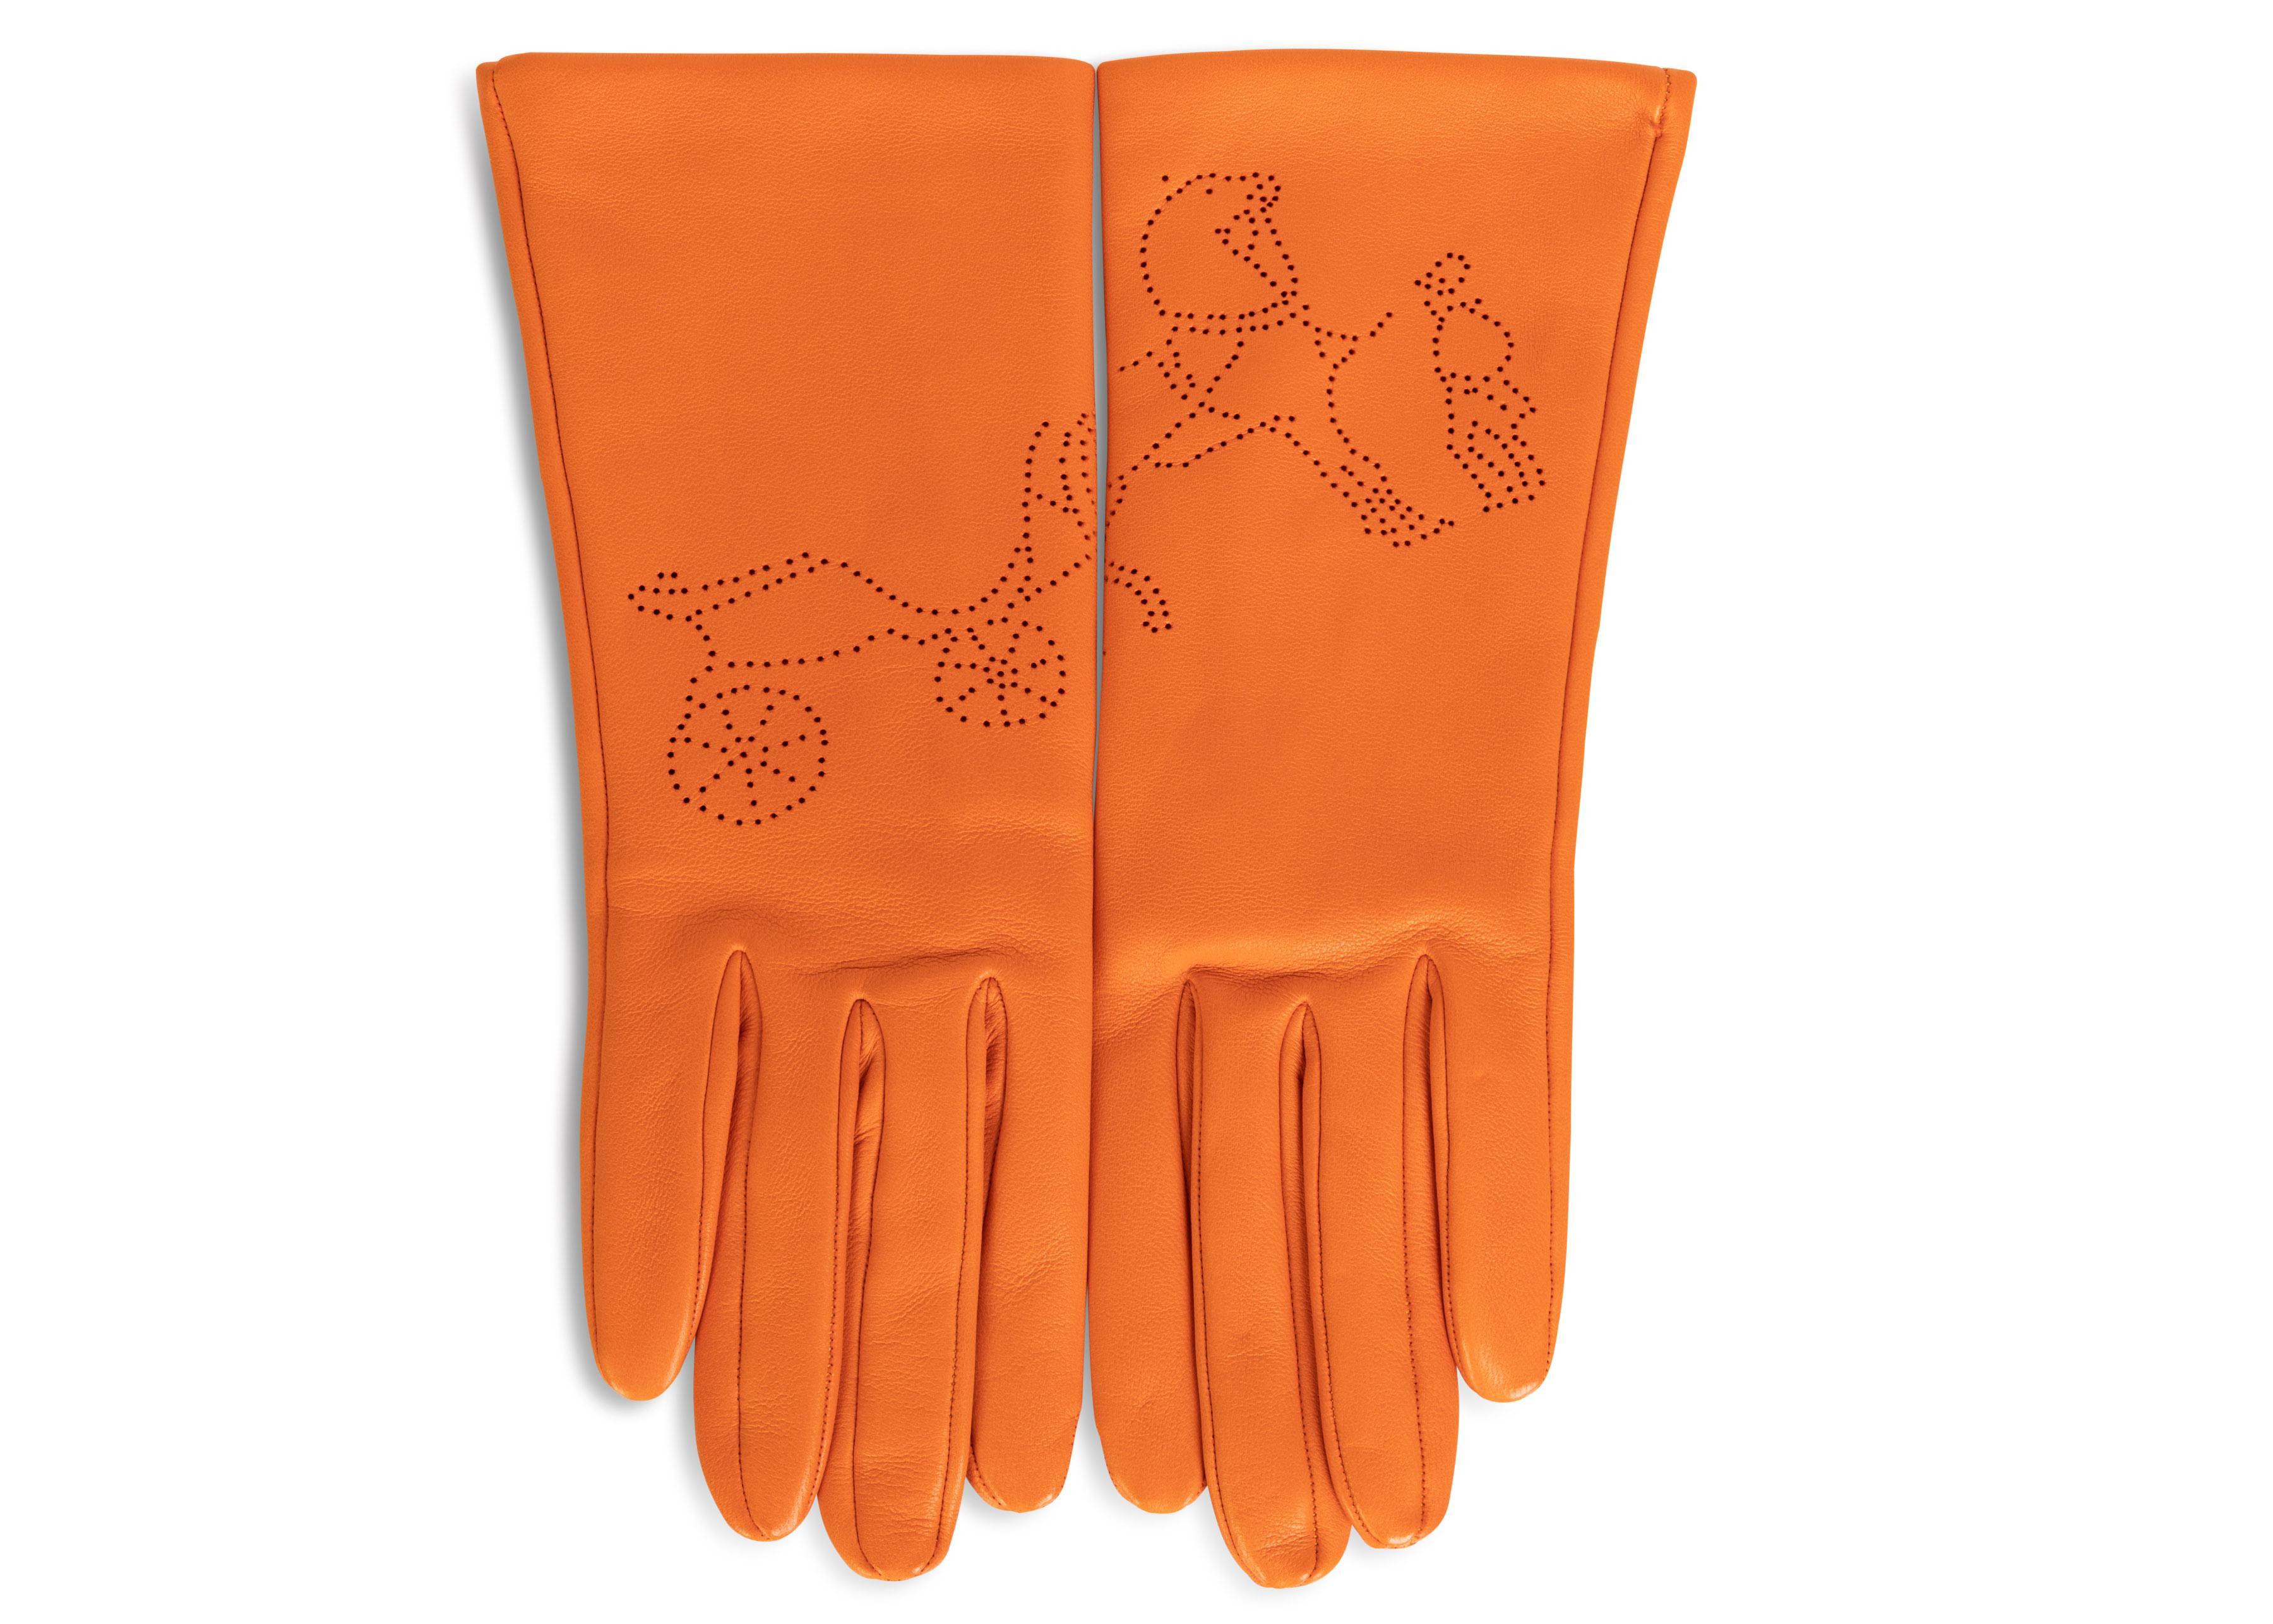 Hermès is at the pinnacle of luxury in every sense of the term. However, Hermès is most lauded for their impeccably crafted leather goods that boast of exceptional quality and the storied legacy of French design. These circa 2012 gloves are made